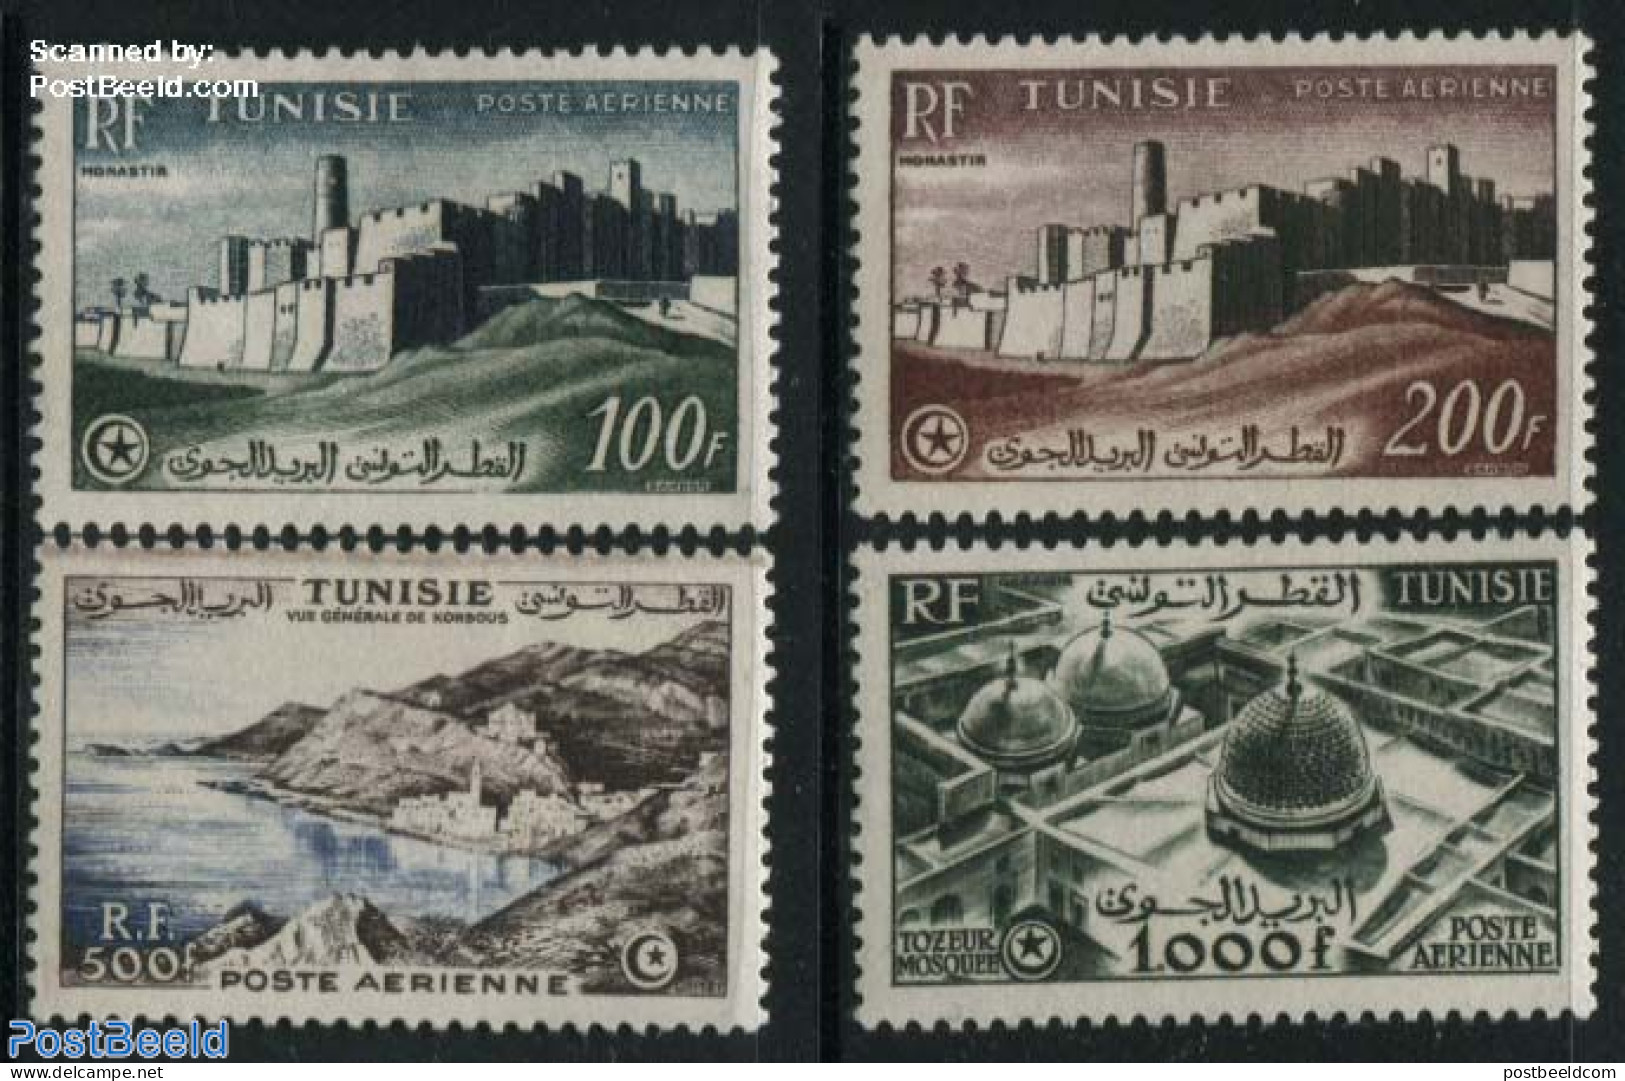 Tunisia 1953 Definitives 4v (with RF), Unused (hinged), Art - Castles & Fortifications - Castelli